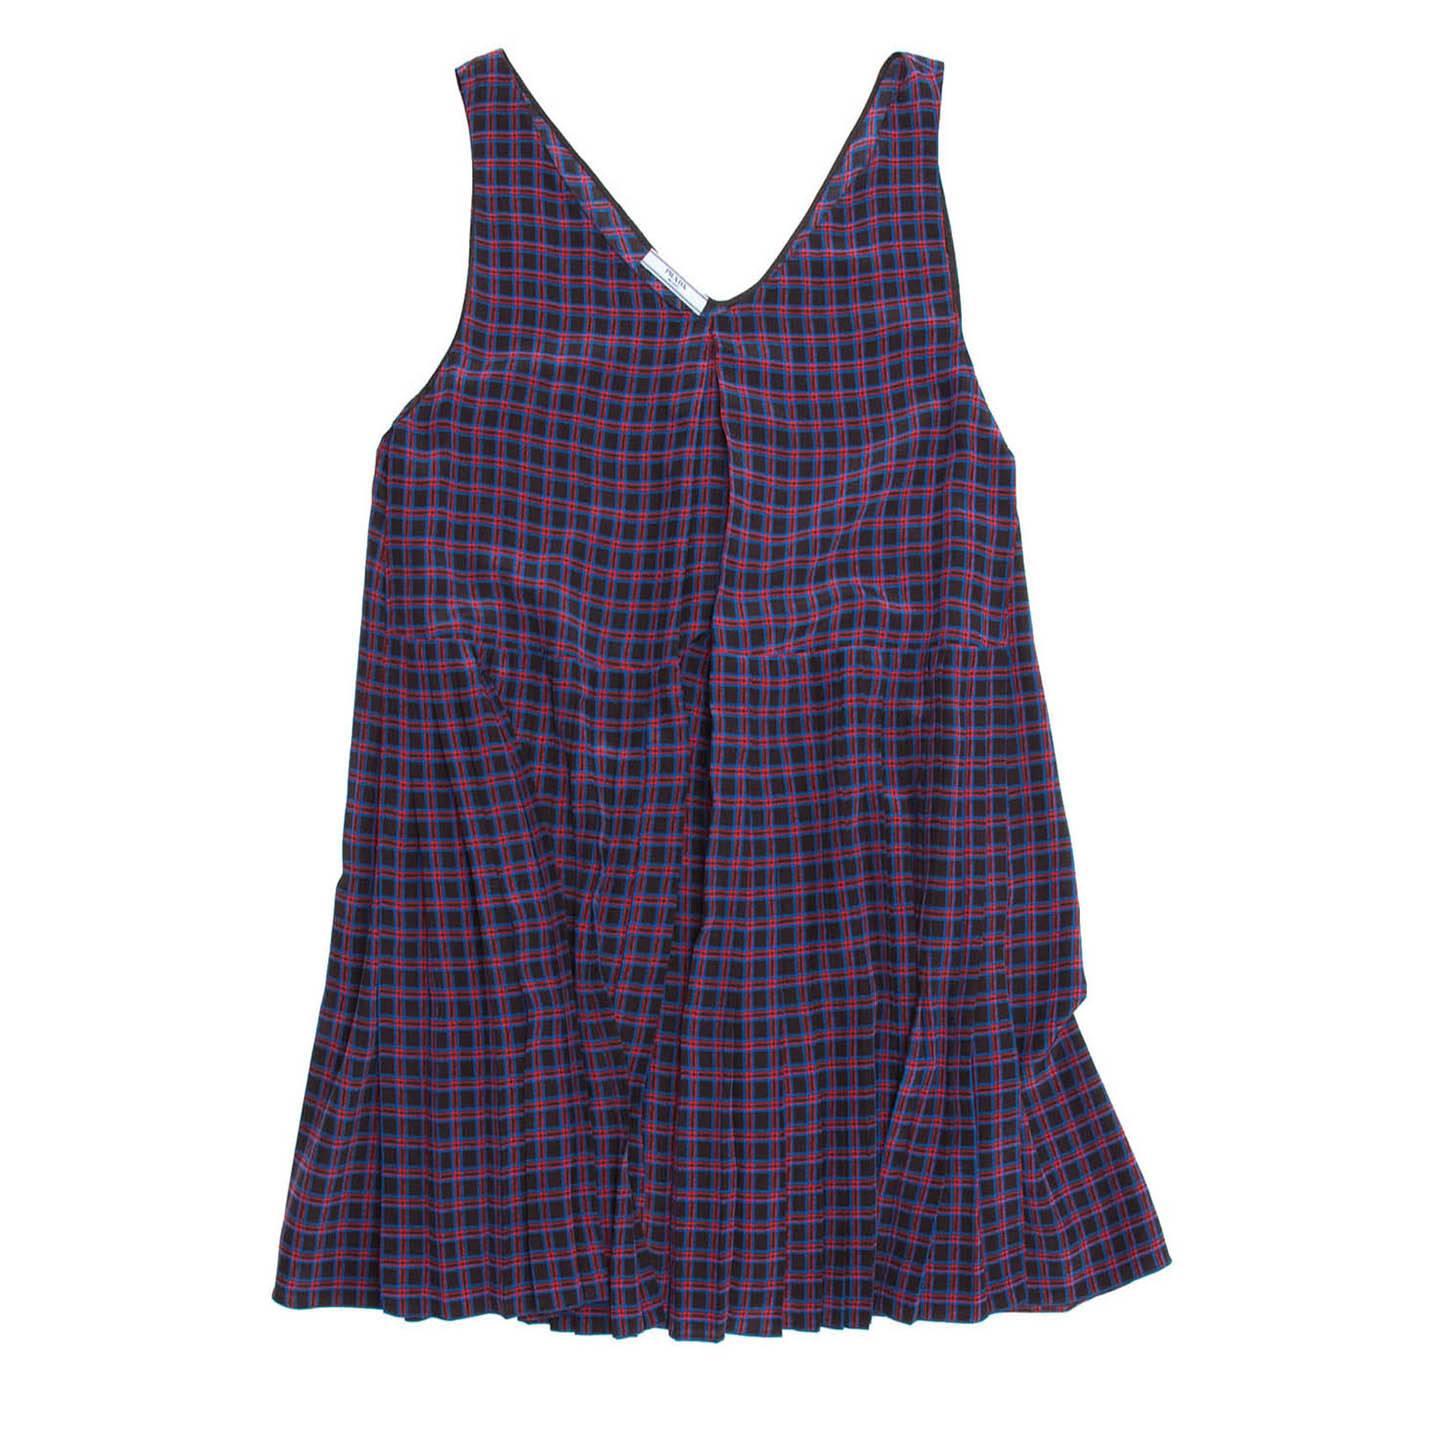 Blue, black, and red small plaid sleeveless boxy cut baby doll above knee length silk dress. Inverted pleat from necklne down at front and back and pleated hem skirt.

Size  42 Italian sizing

Condition  Excellent: worn once